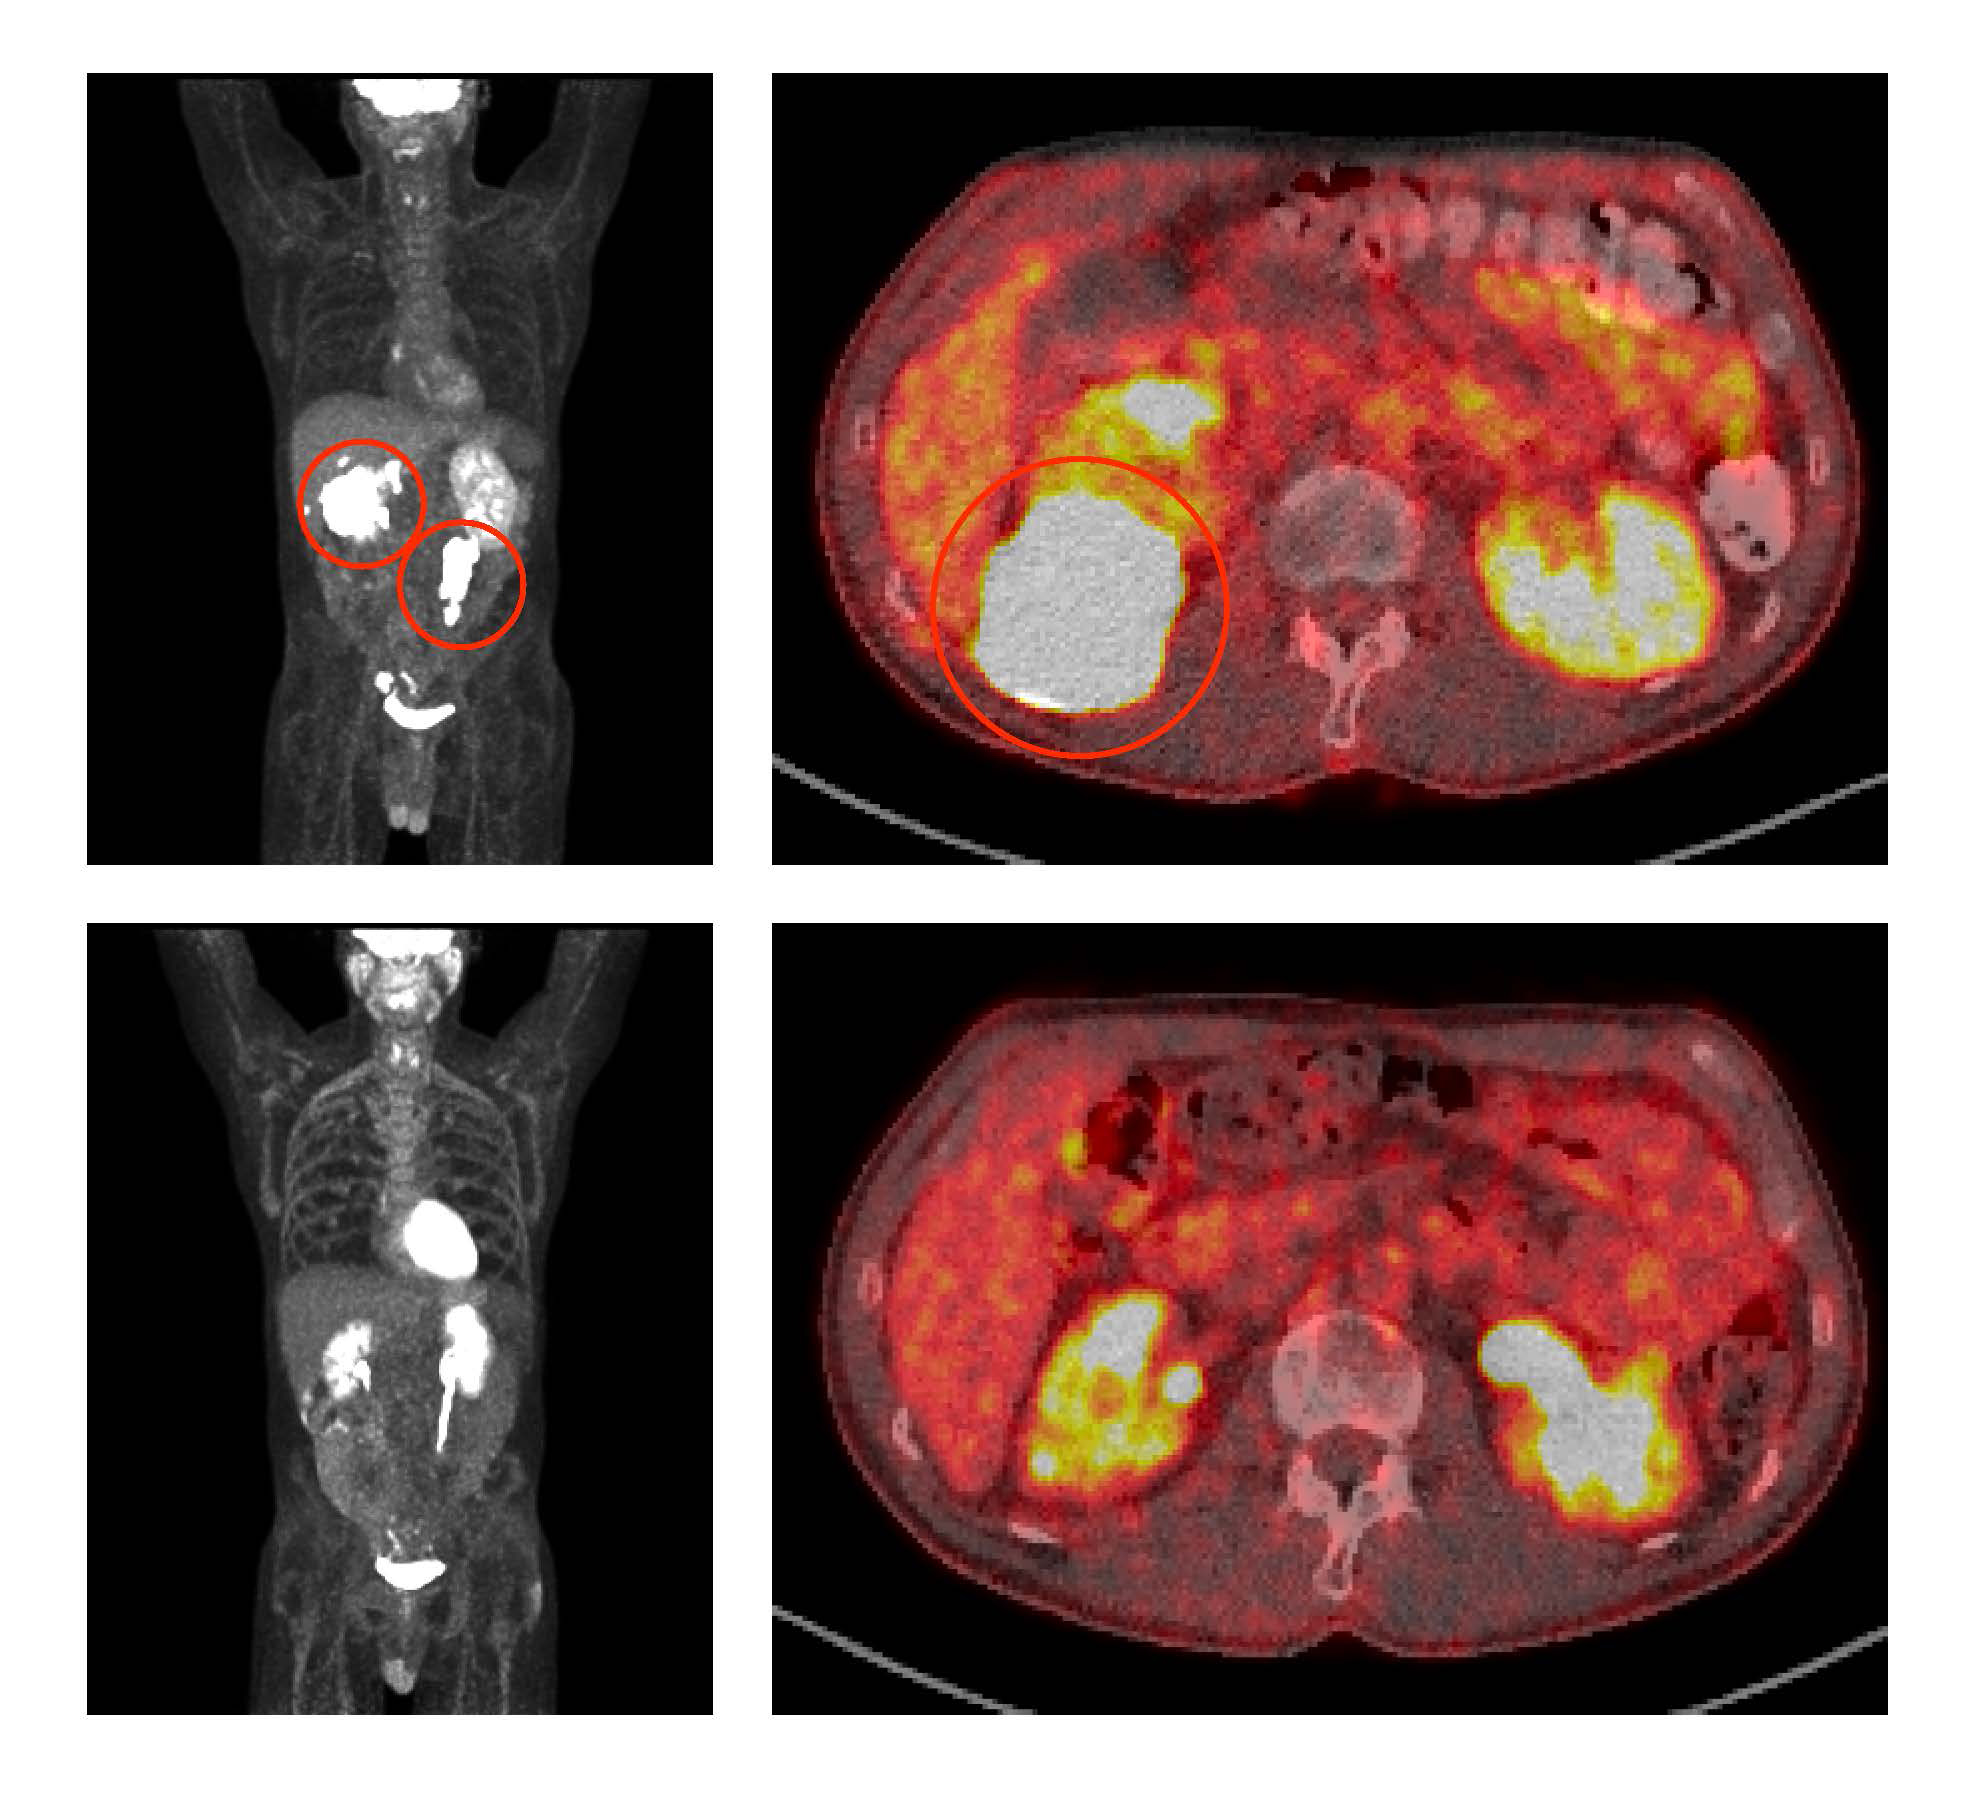 Image of medical scans that show shrinking tumors in a patient with large lymphoma tumors.